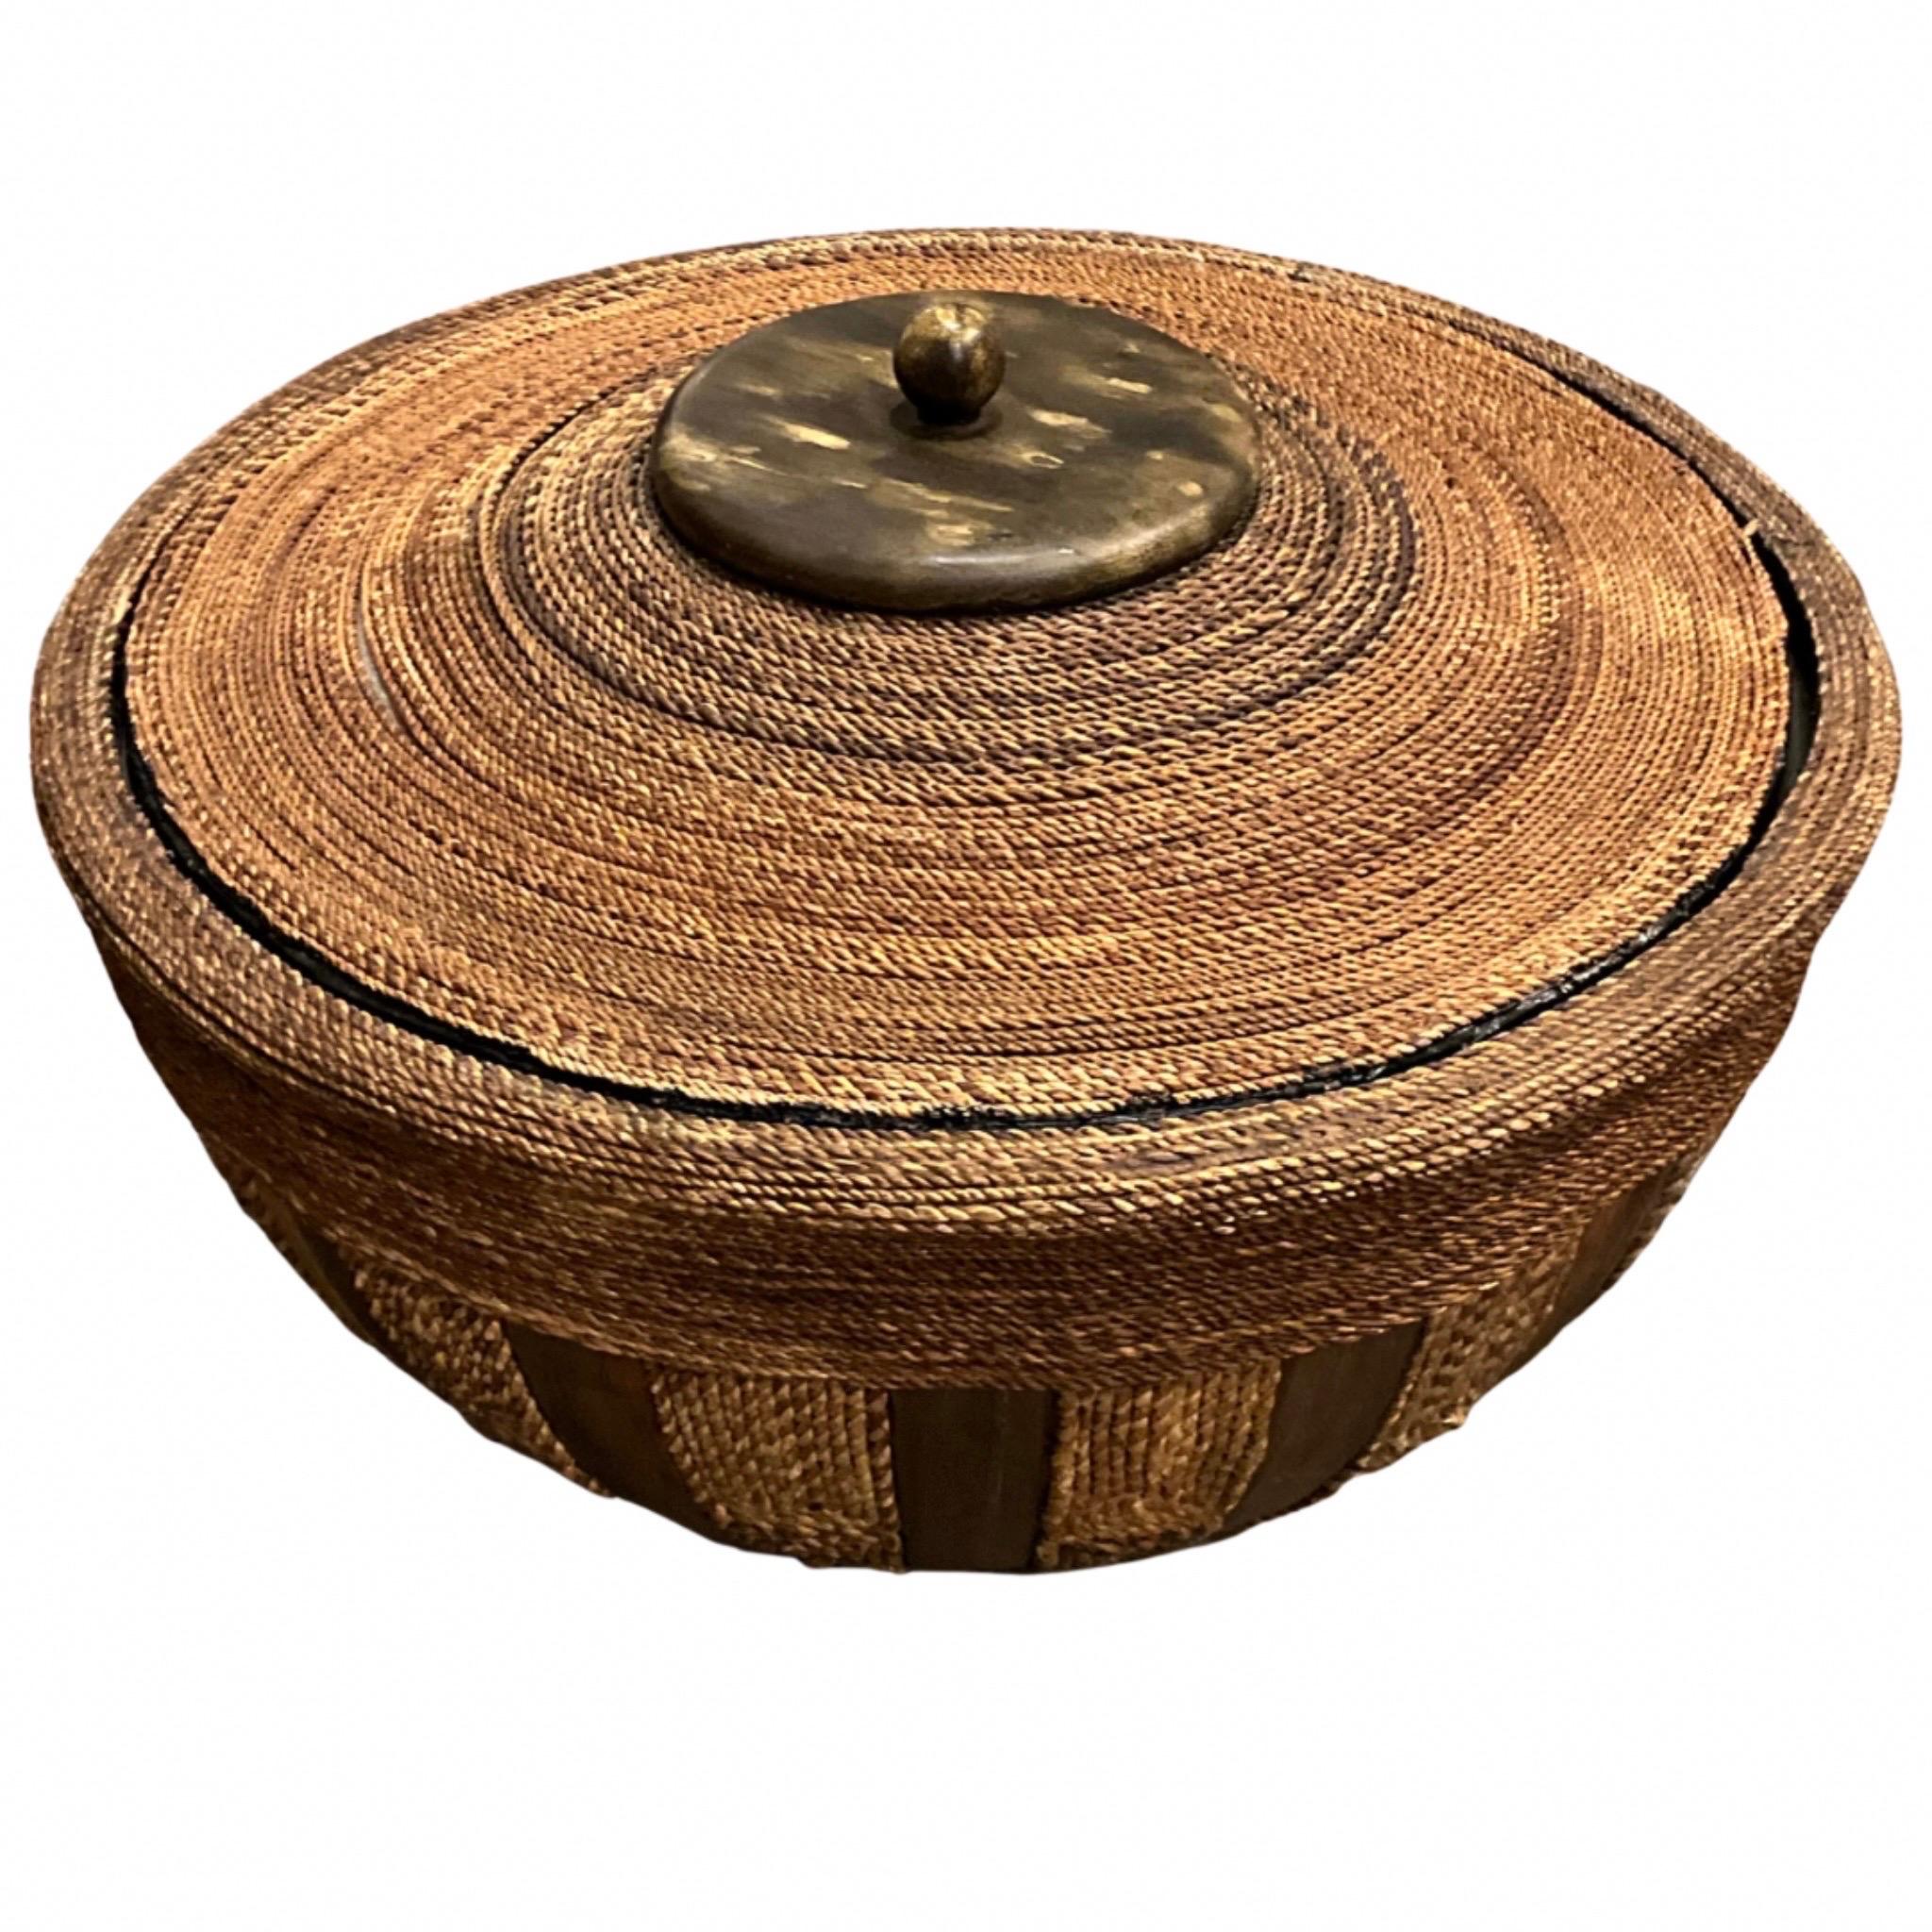 Natural Woven Fiber & Wood Container with Lid 2